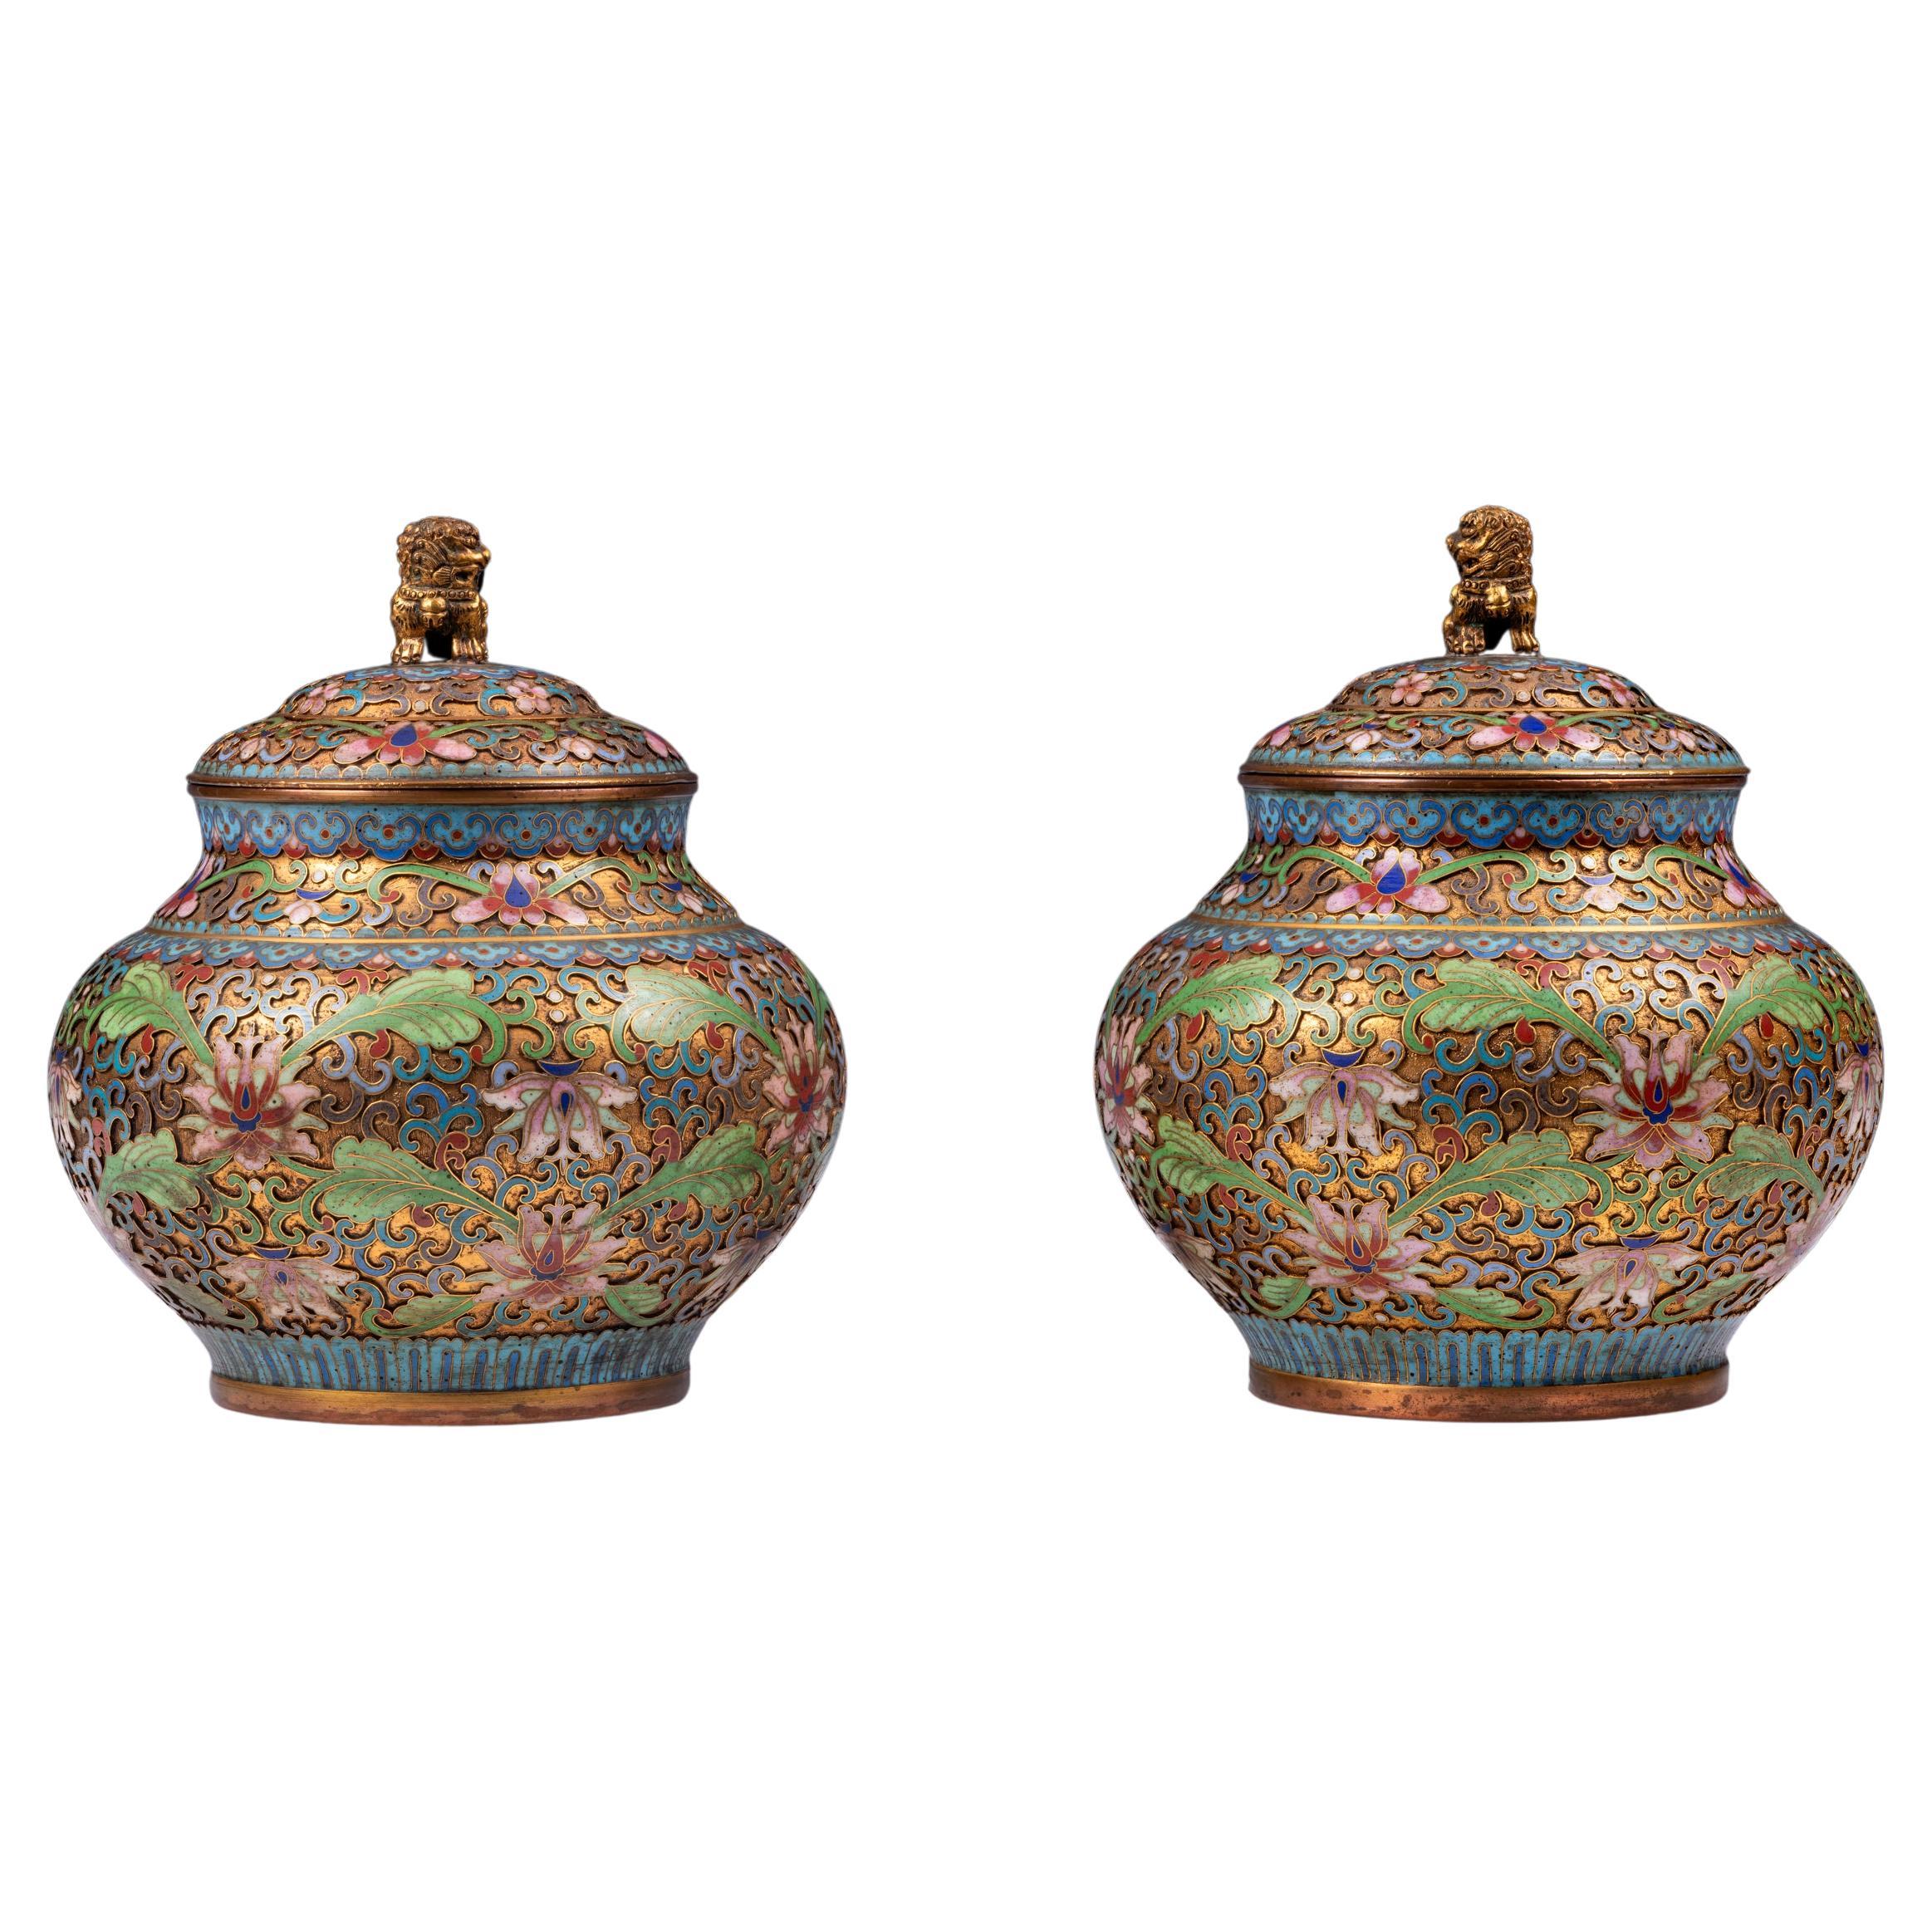 Pair of Early 19th Century Chinese Cloisonne Enamel Bowls & Covers, Qing Dynasty